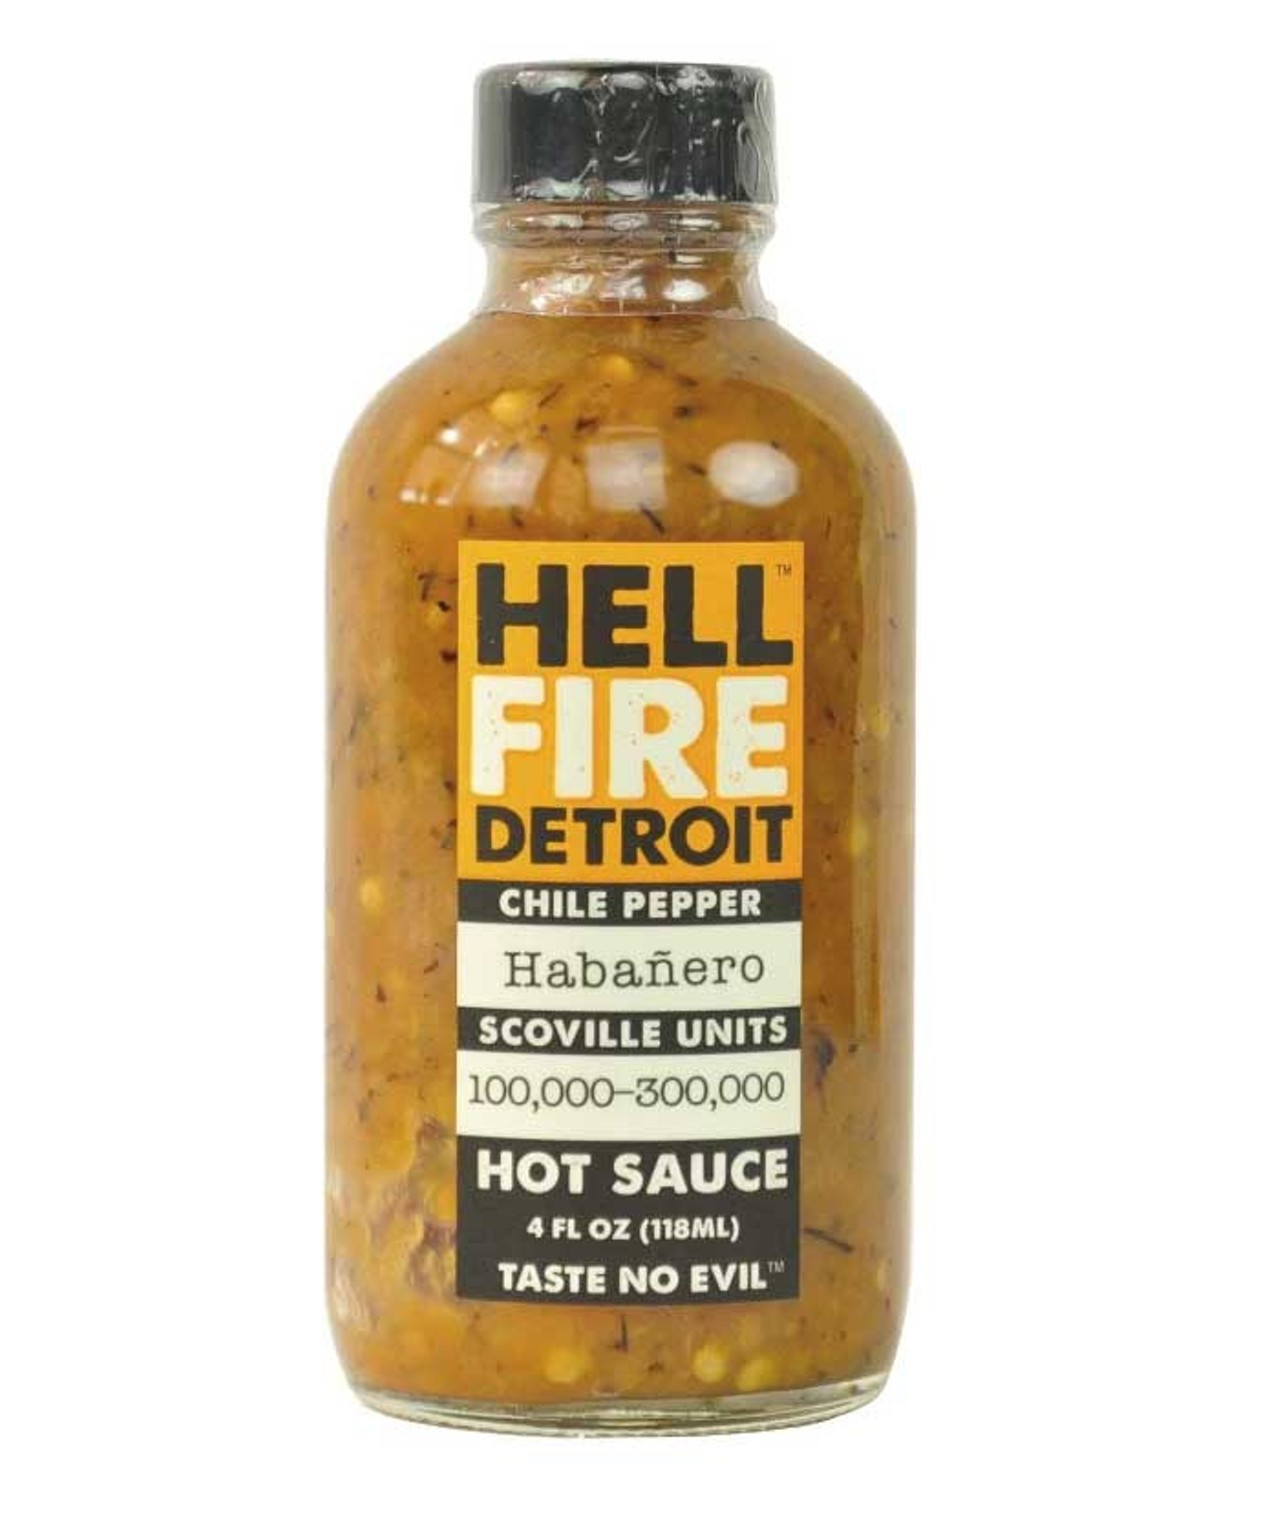 Hellfire Detroit sauce
hellfiredetroit.com
This local hot sauce brand was made famous by being 
featured on multiple seasons of Hot Ones, the popular 
interview show where guests answer tough questions while 
eating spicy chicken wings. Season 9’s Habanero sauce is 
available to order online for $15 (packing 100,000-300,000 
Scoville units), while Season 13’s Bourbon Habanero Ghost 
is available for $18 (at some 200,000-400,000 Scoville units).
Remember to keep a pitcher of milk handy. —Lee DeVito